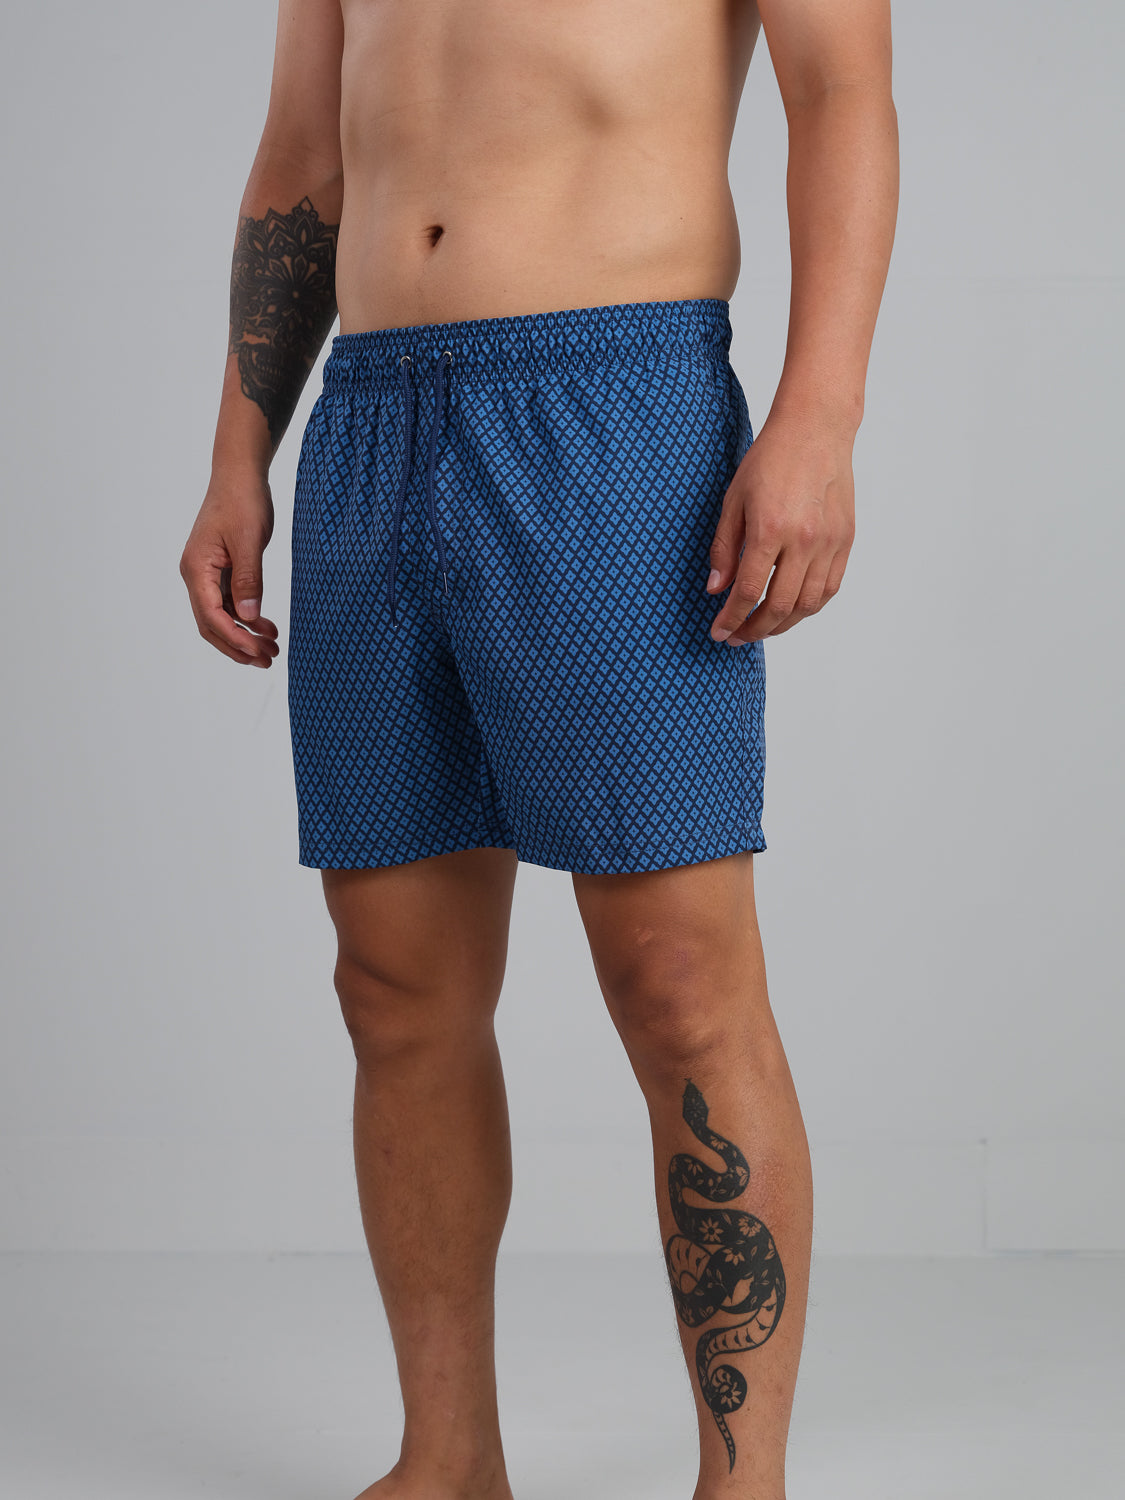 Stars Printed Swim Trunk with Fast Dry and Stretch